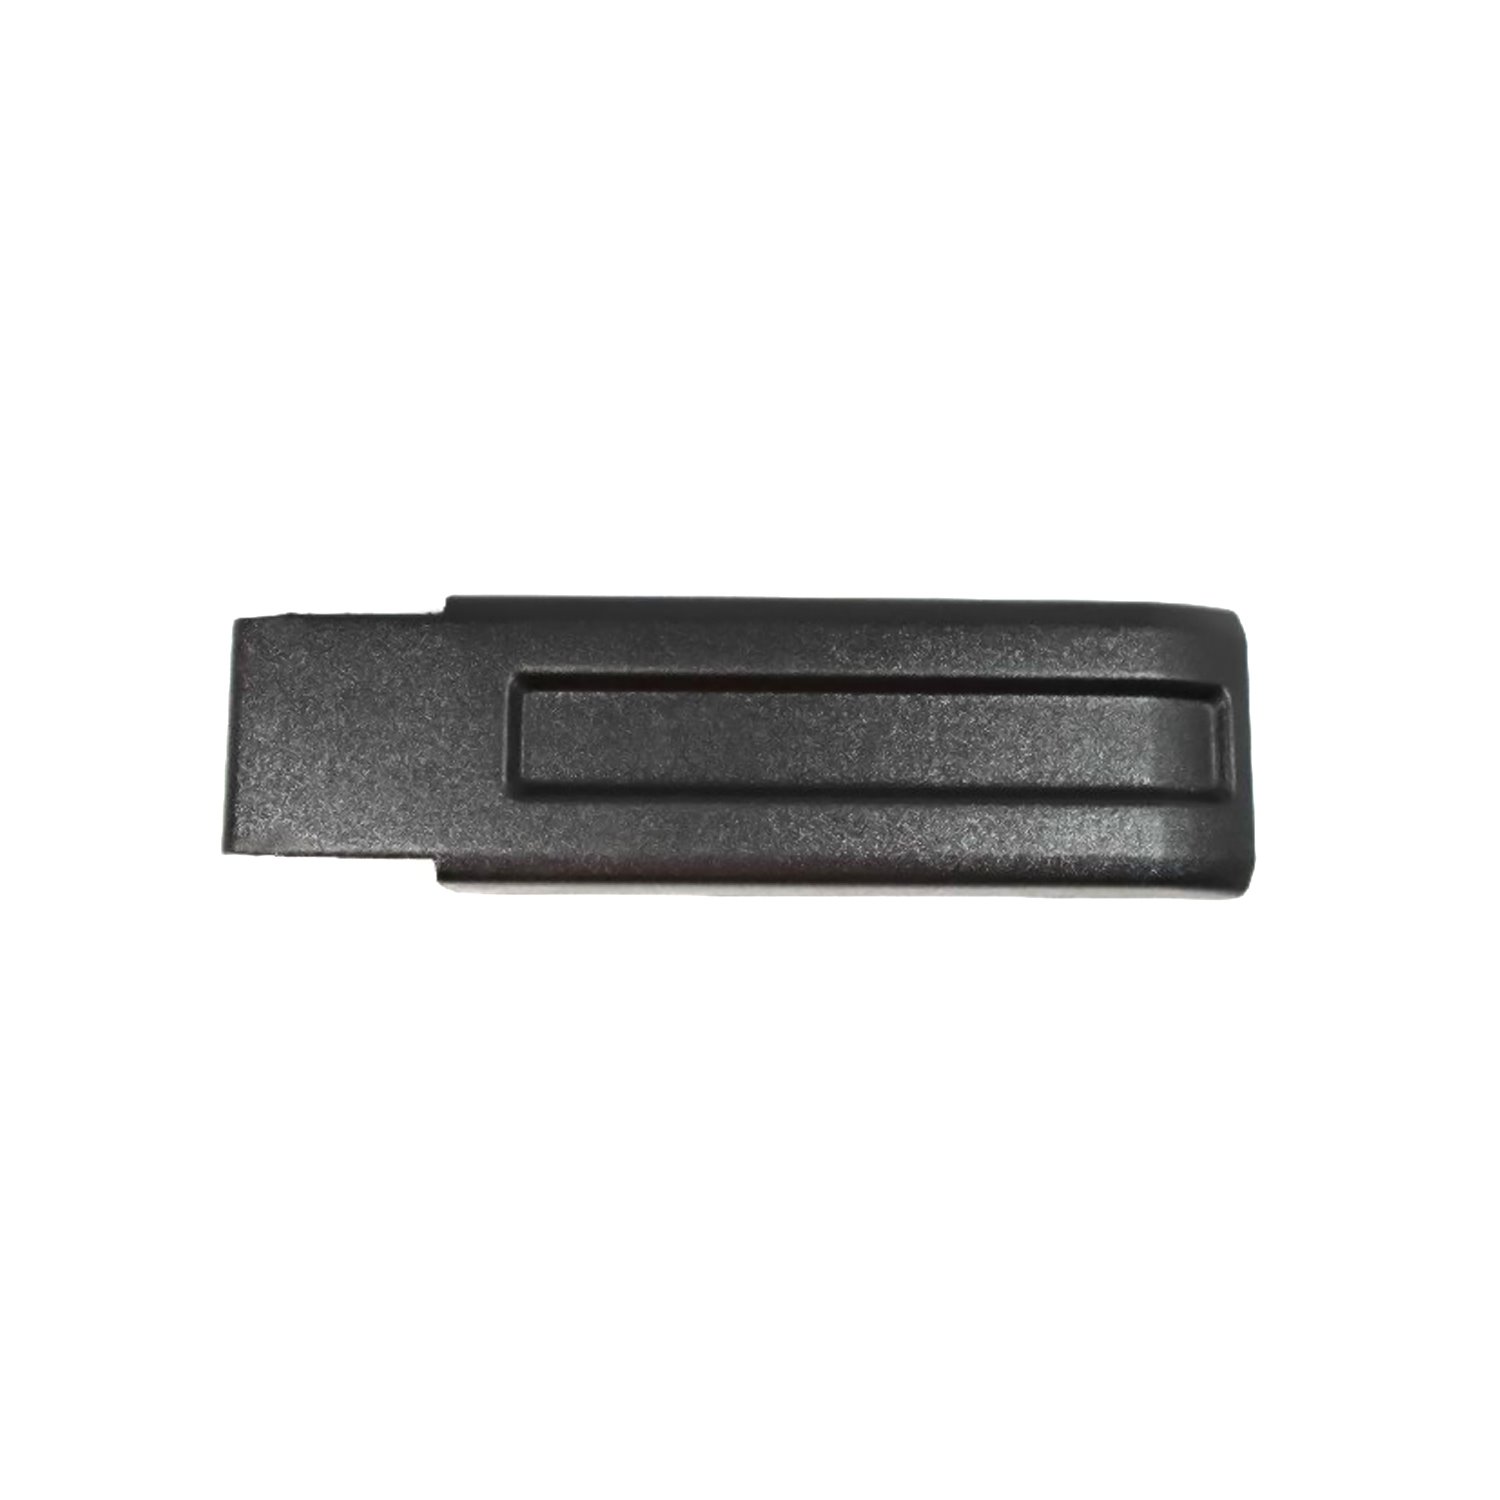 COVER TAILGATE HINGE